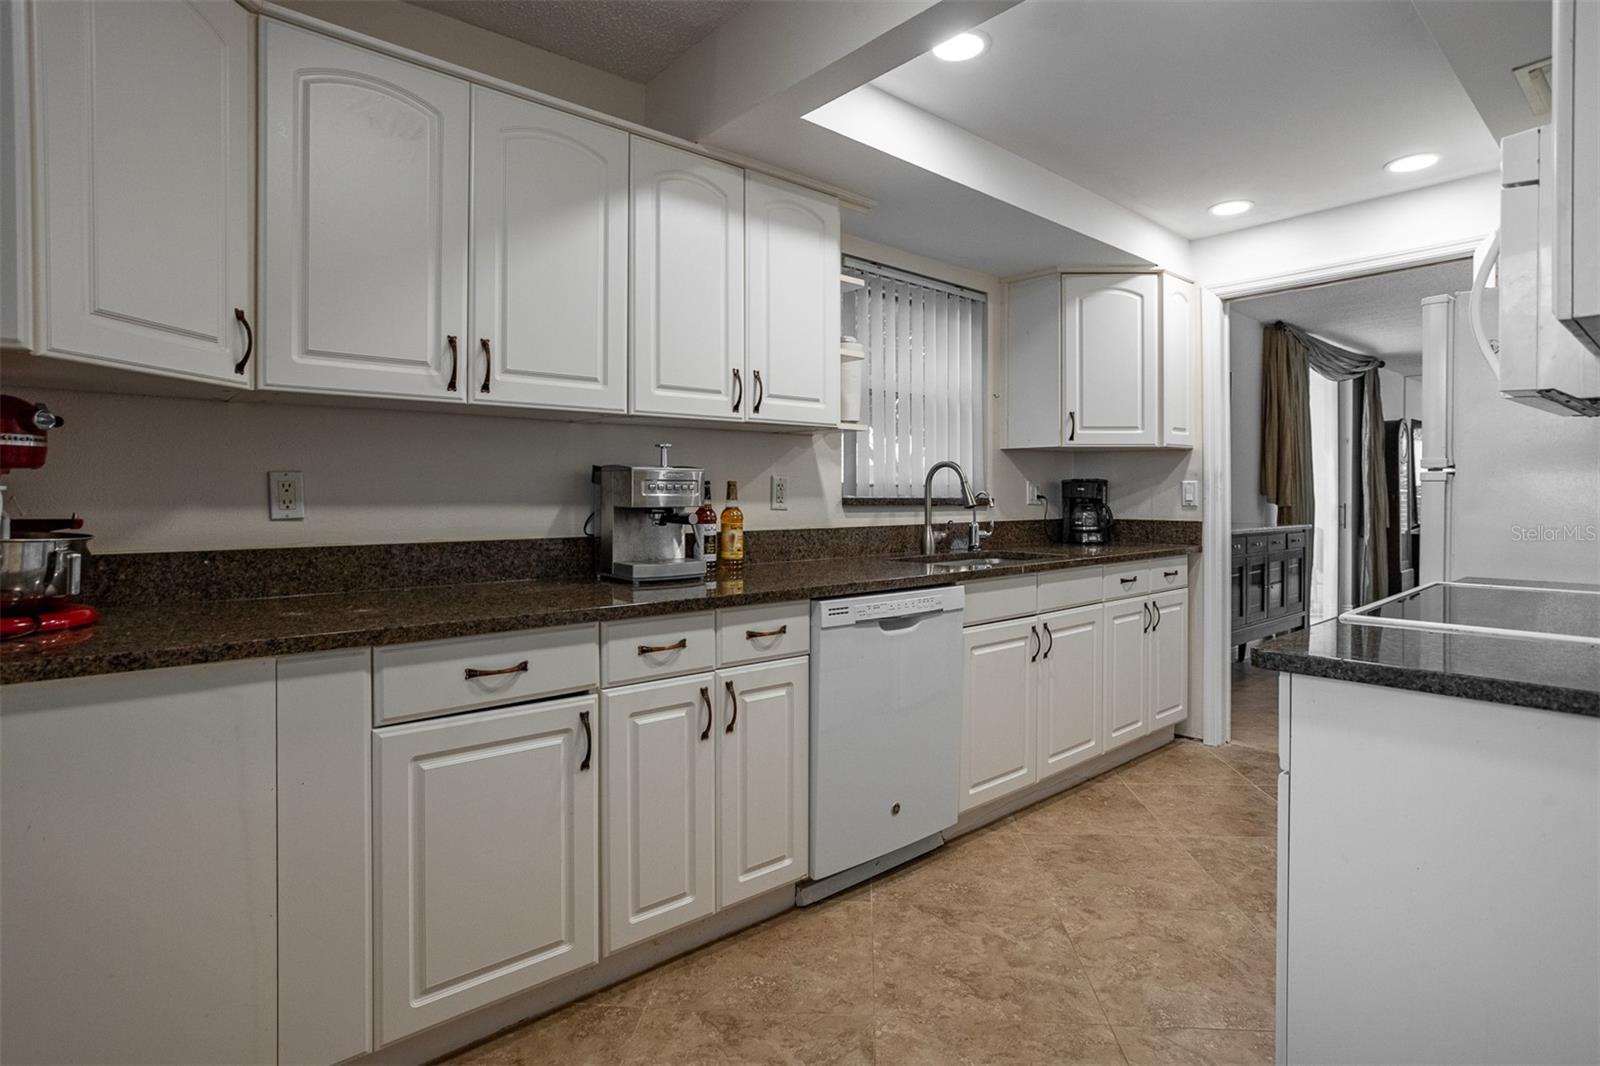 Expanded kitchen with newer granite counter tops and updated lighting features